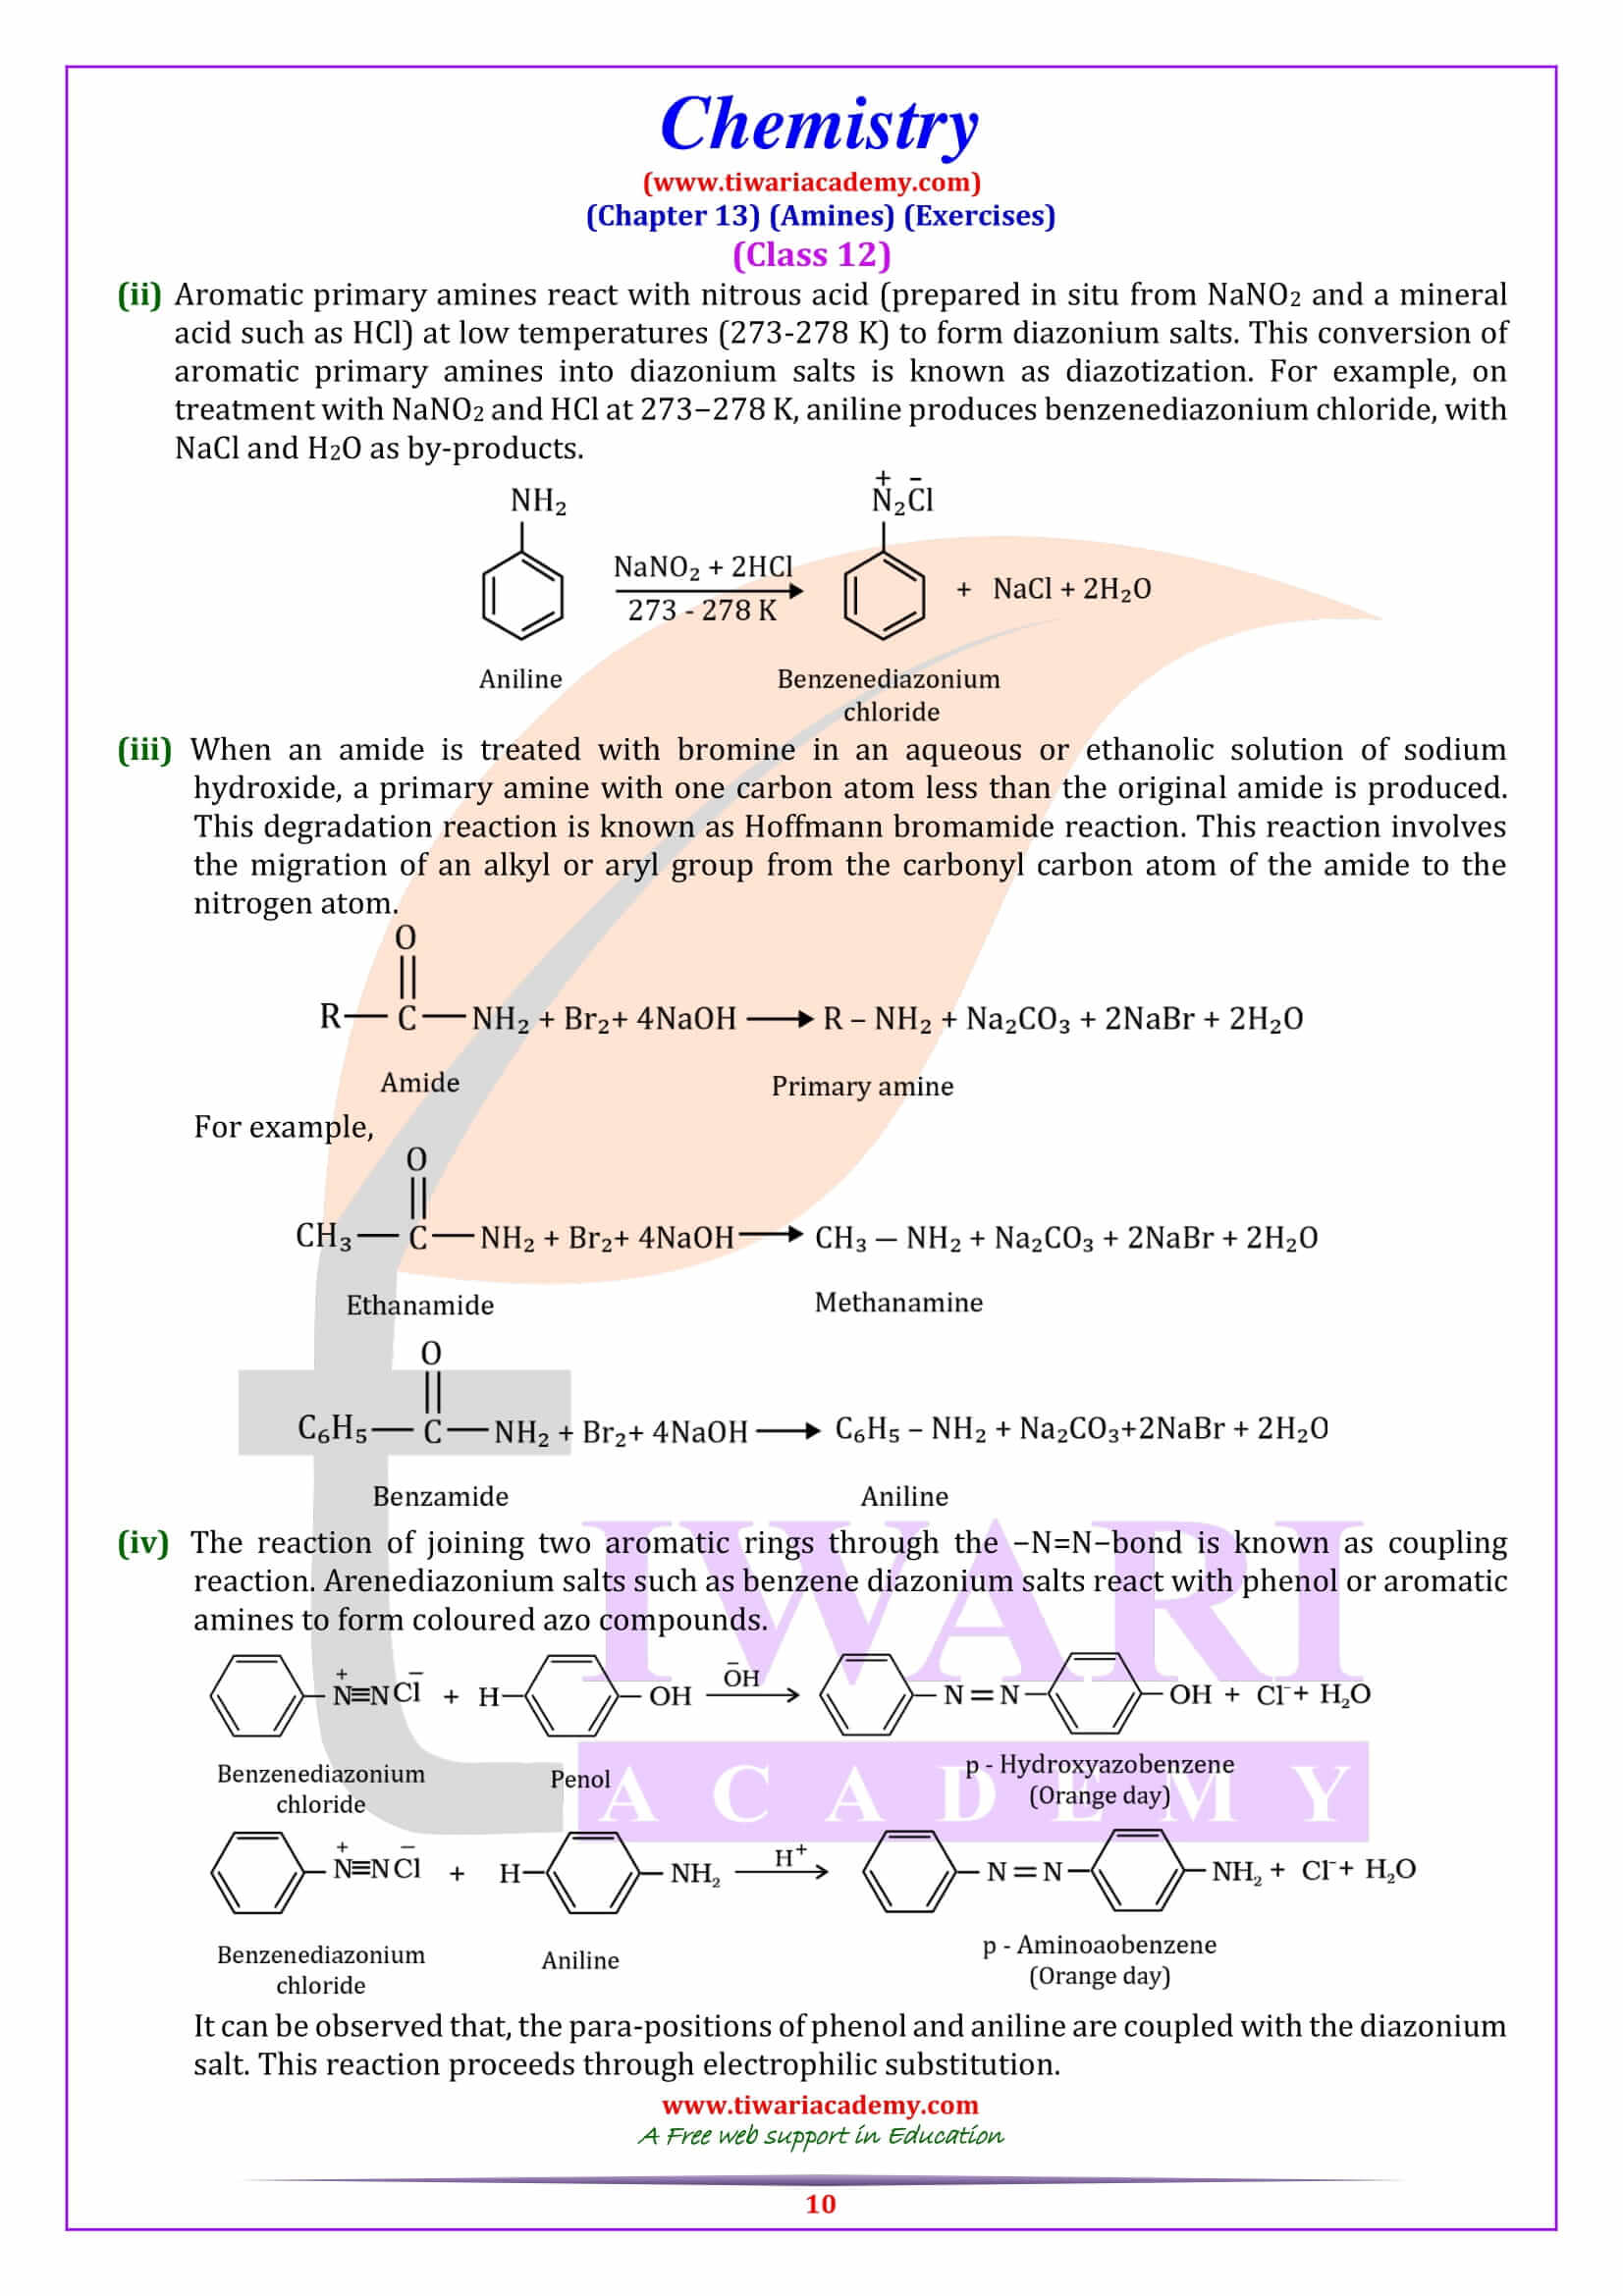 NCERT Solutions for Class 12 Chemistry Chapter 13 guide